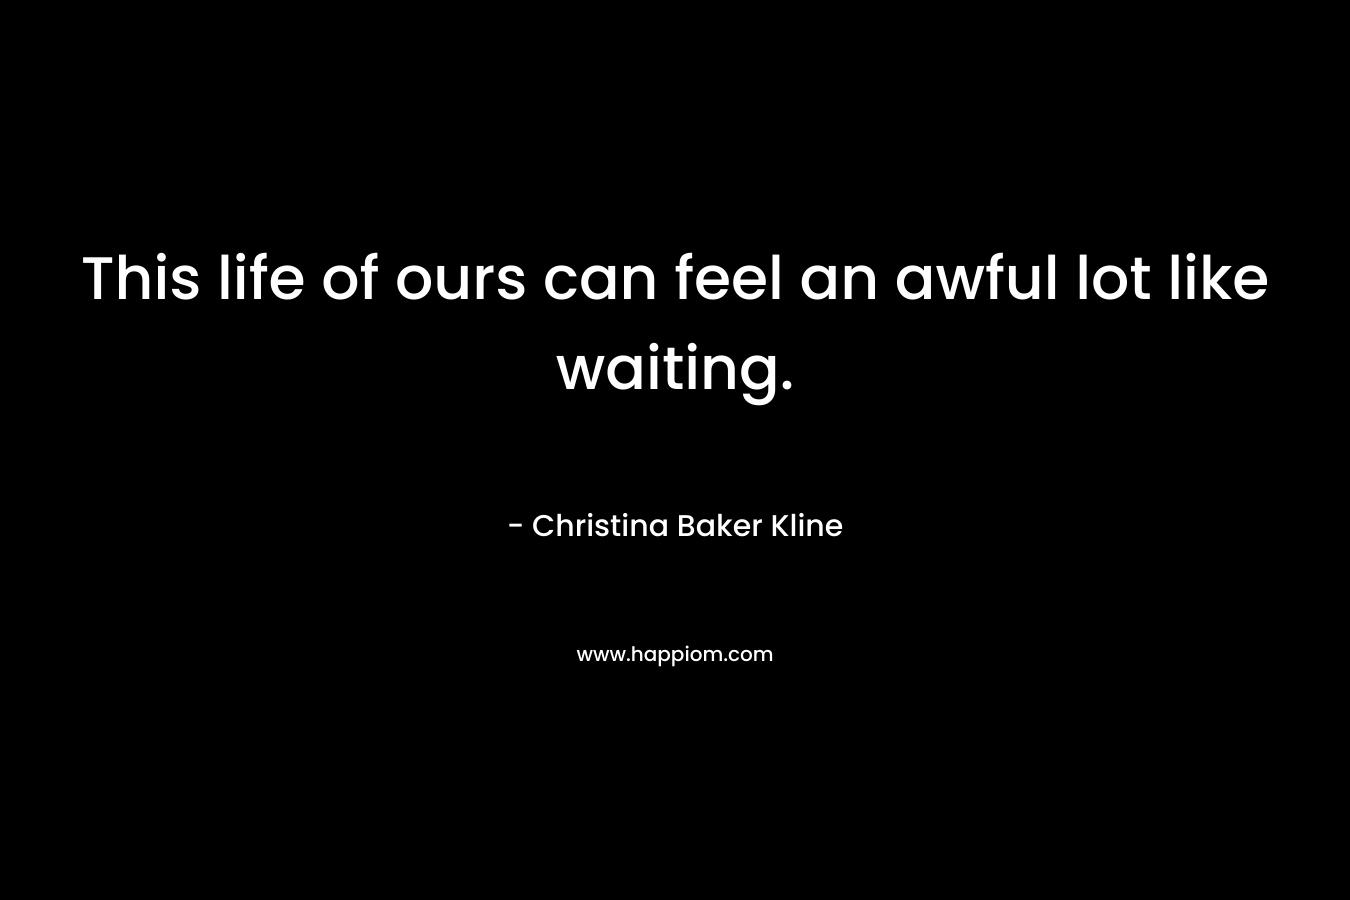 This life of ours can feel an awful lot like waiting. – Christina Baker Kline